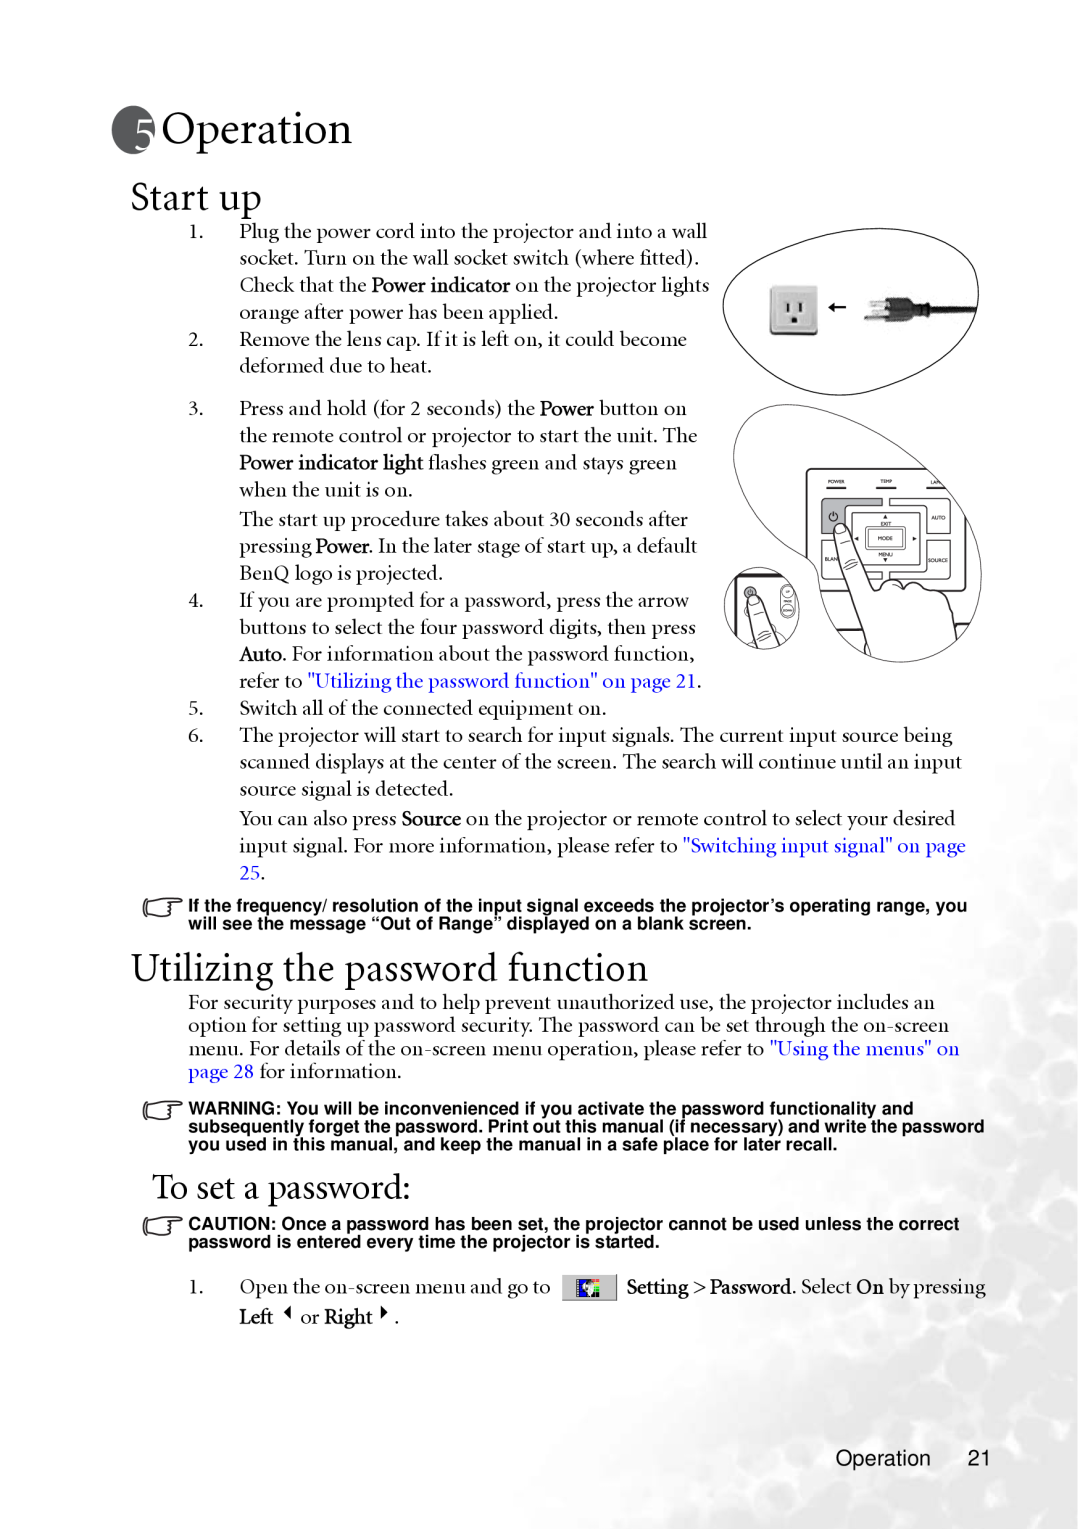 BenQ MP610 user manual Operation, Start up, Utilizing the password function, To set a password 